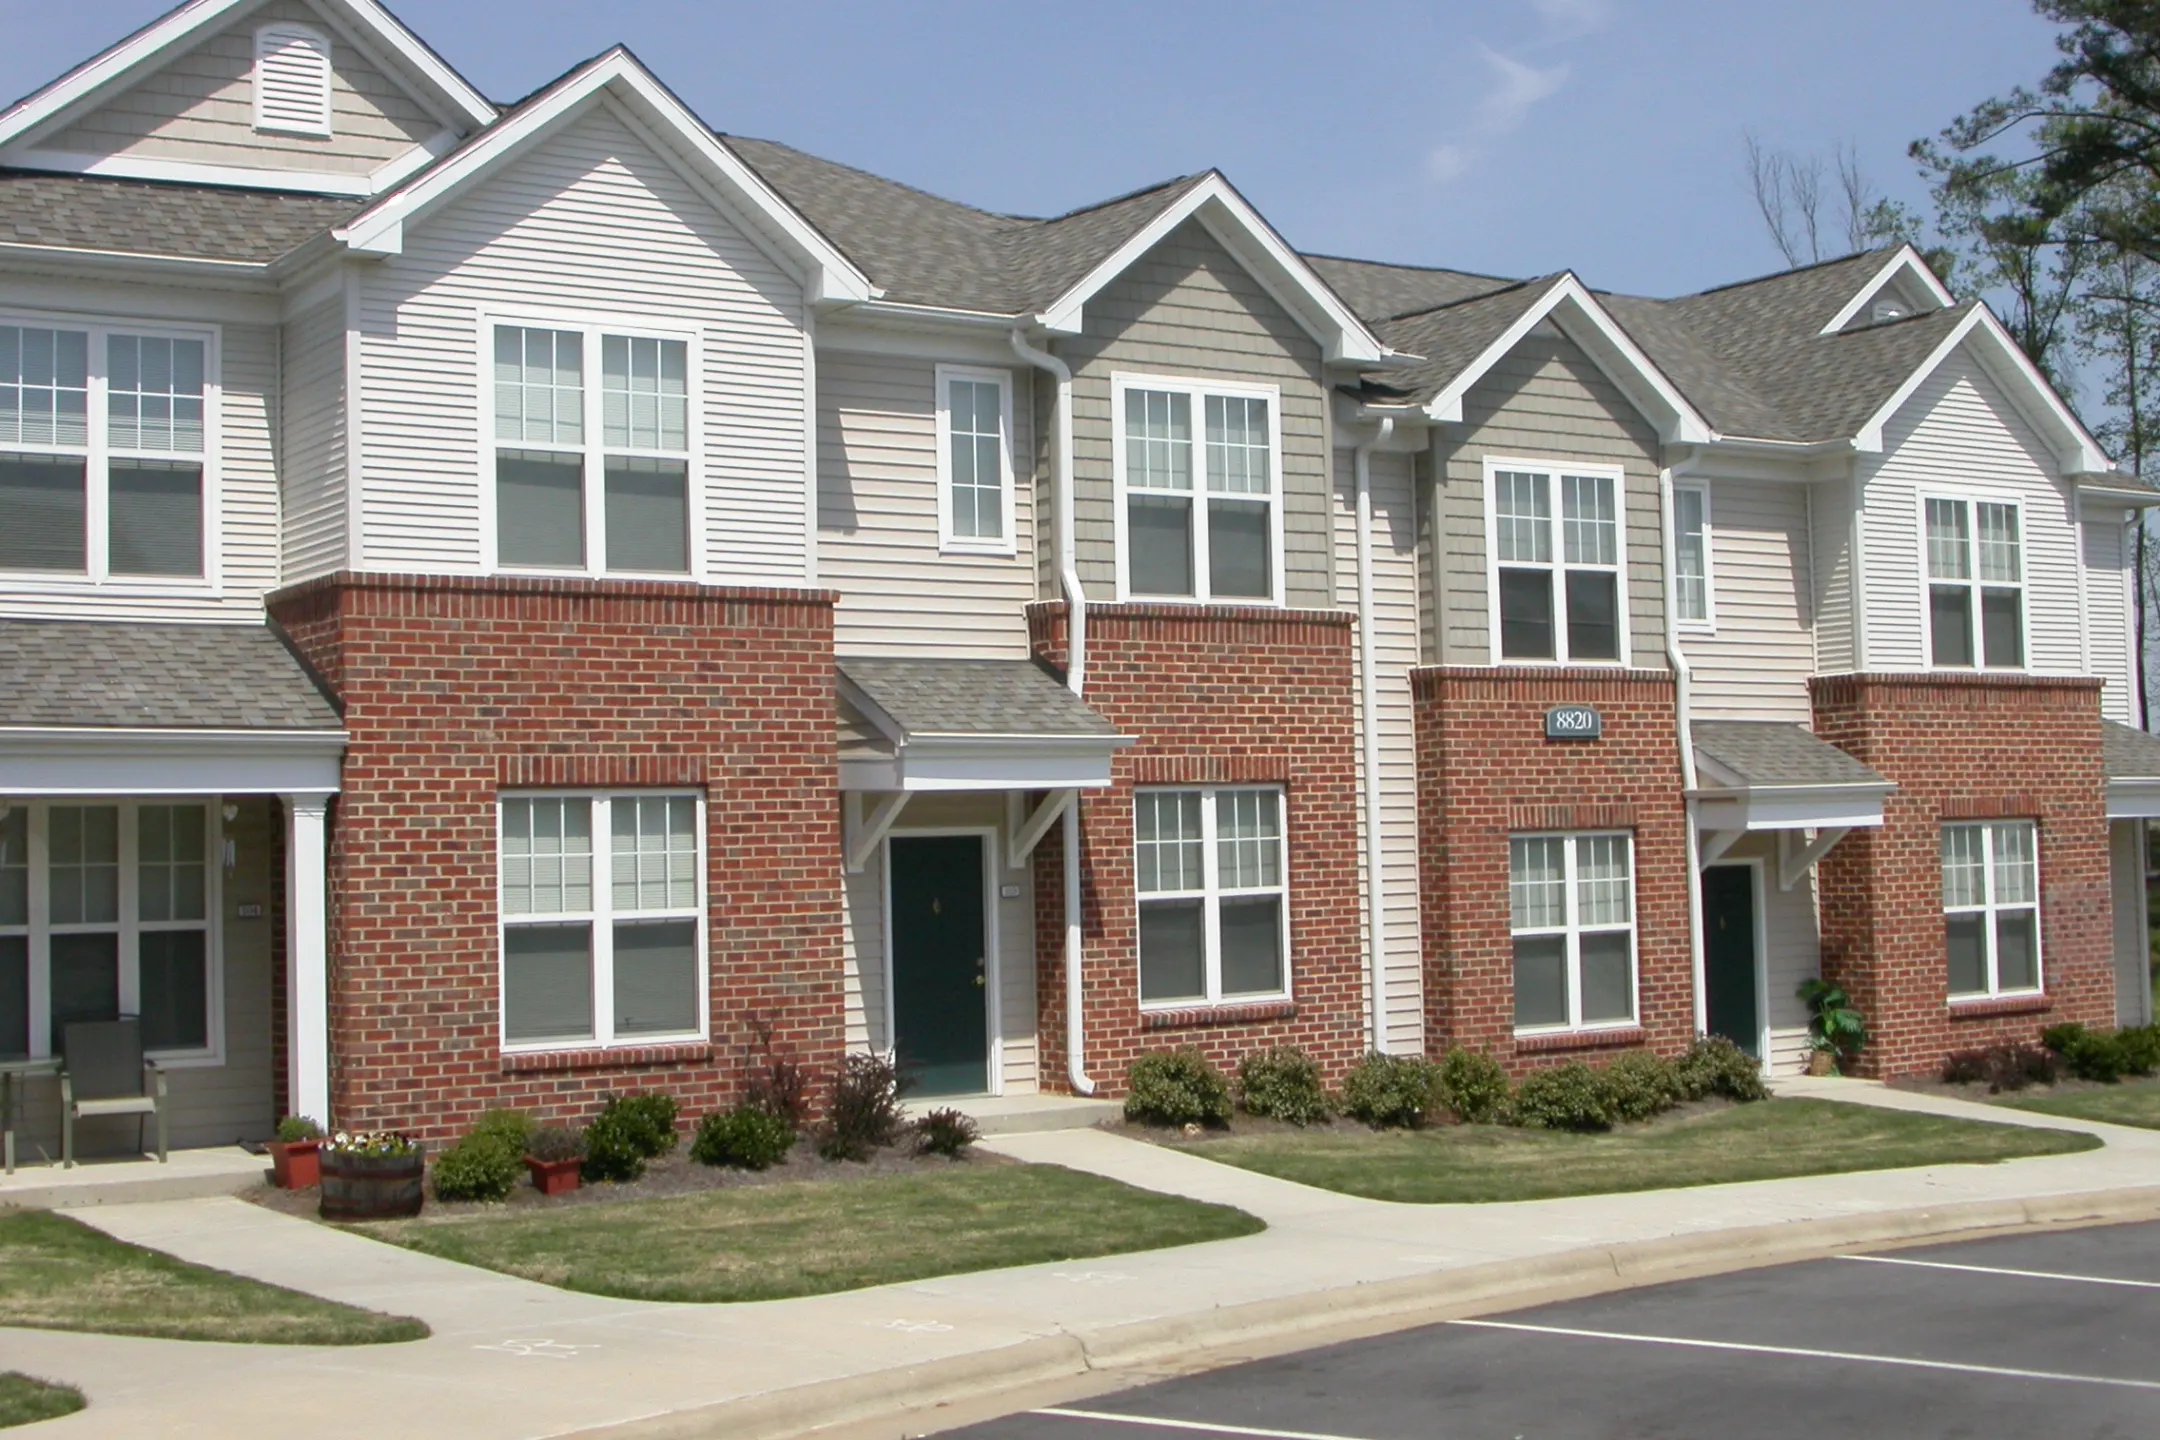 Building - Falls Creek Apartments & Townhomes - Raleigh, NC